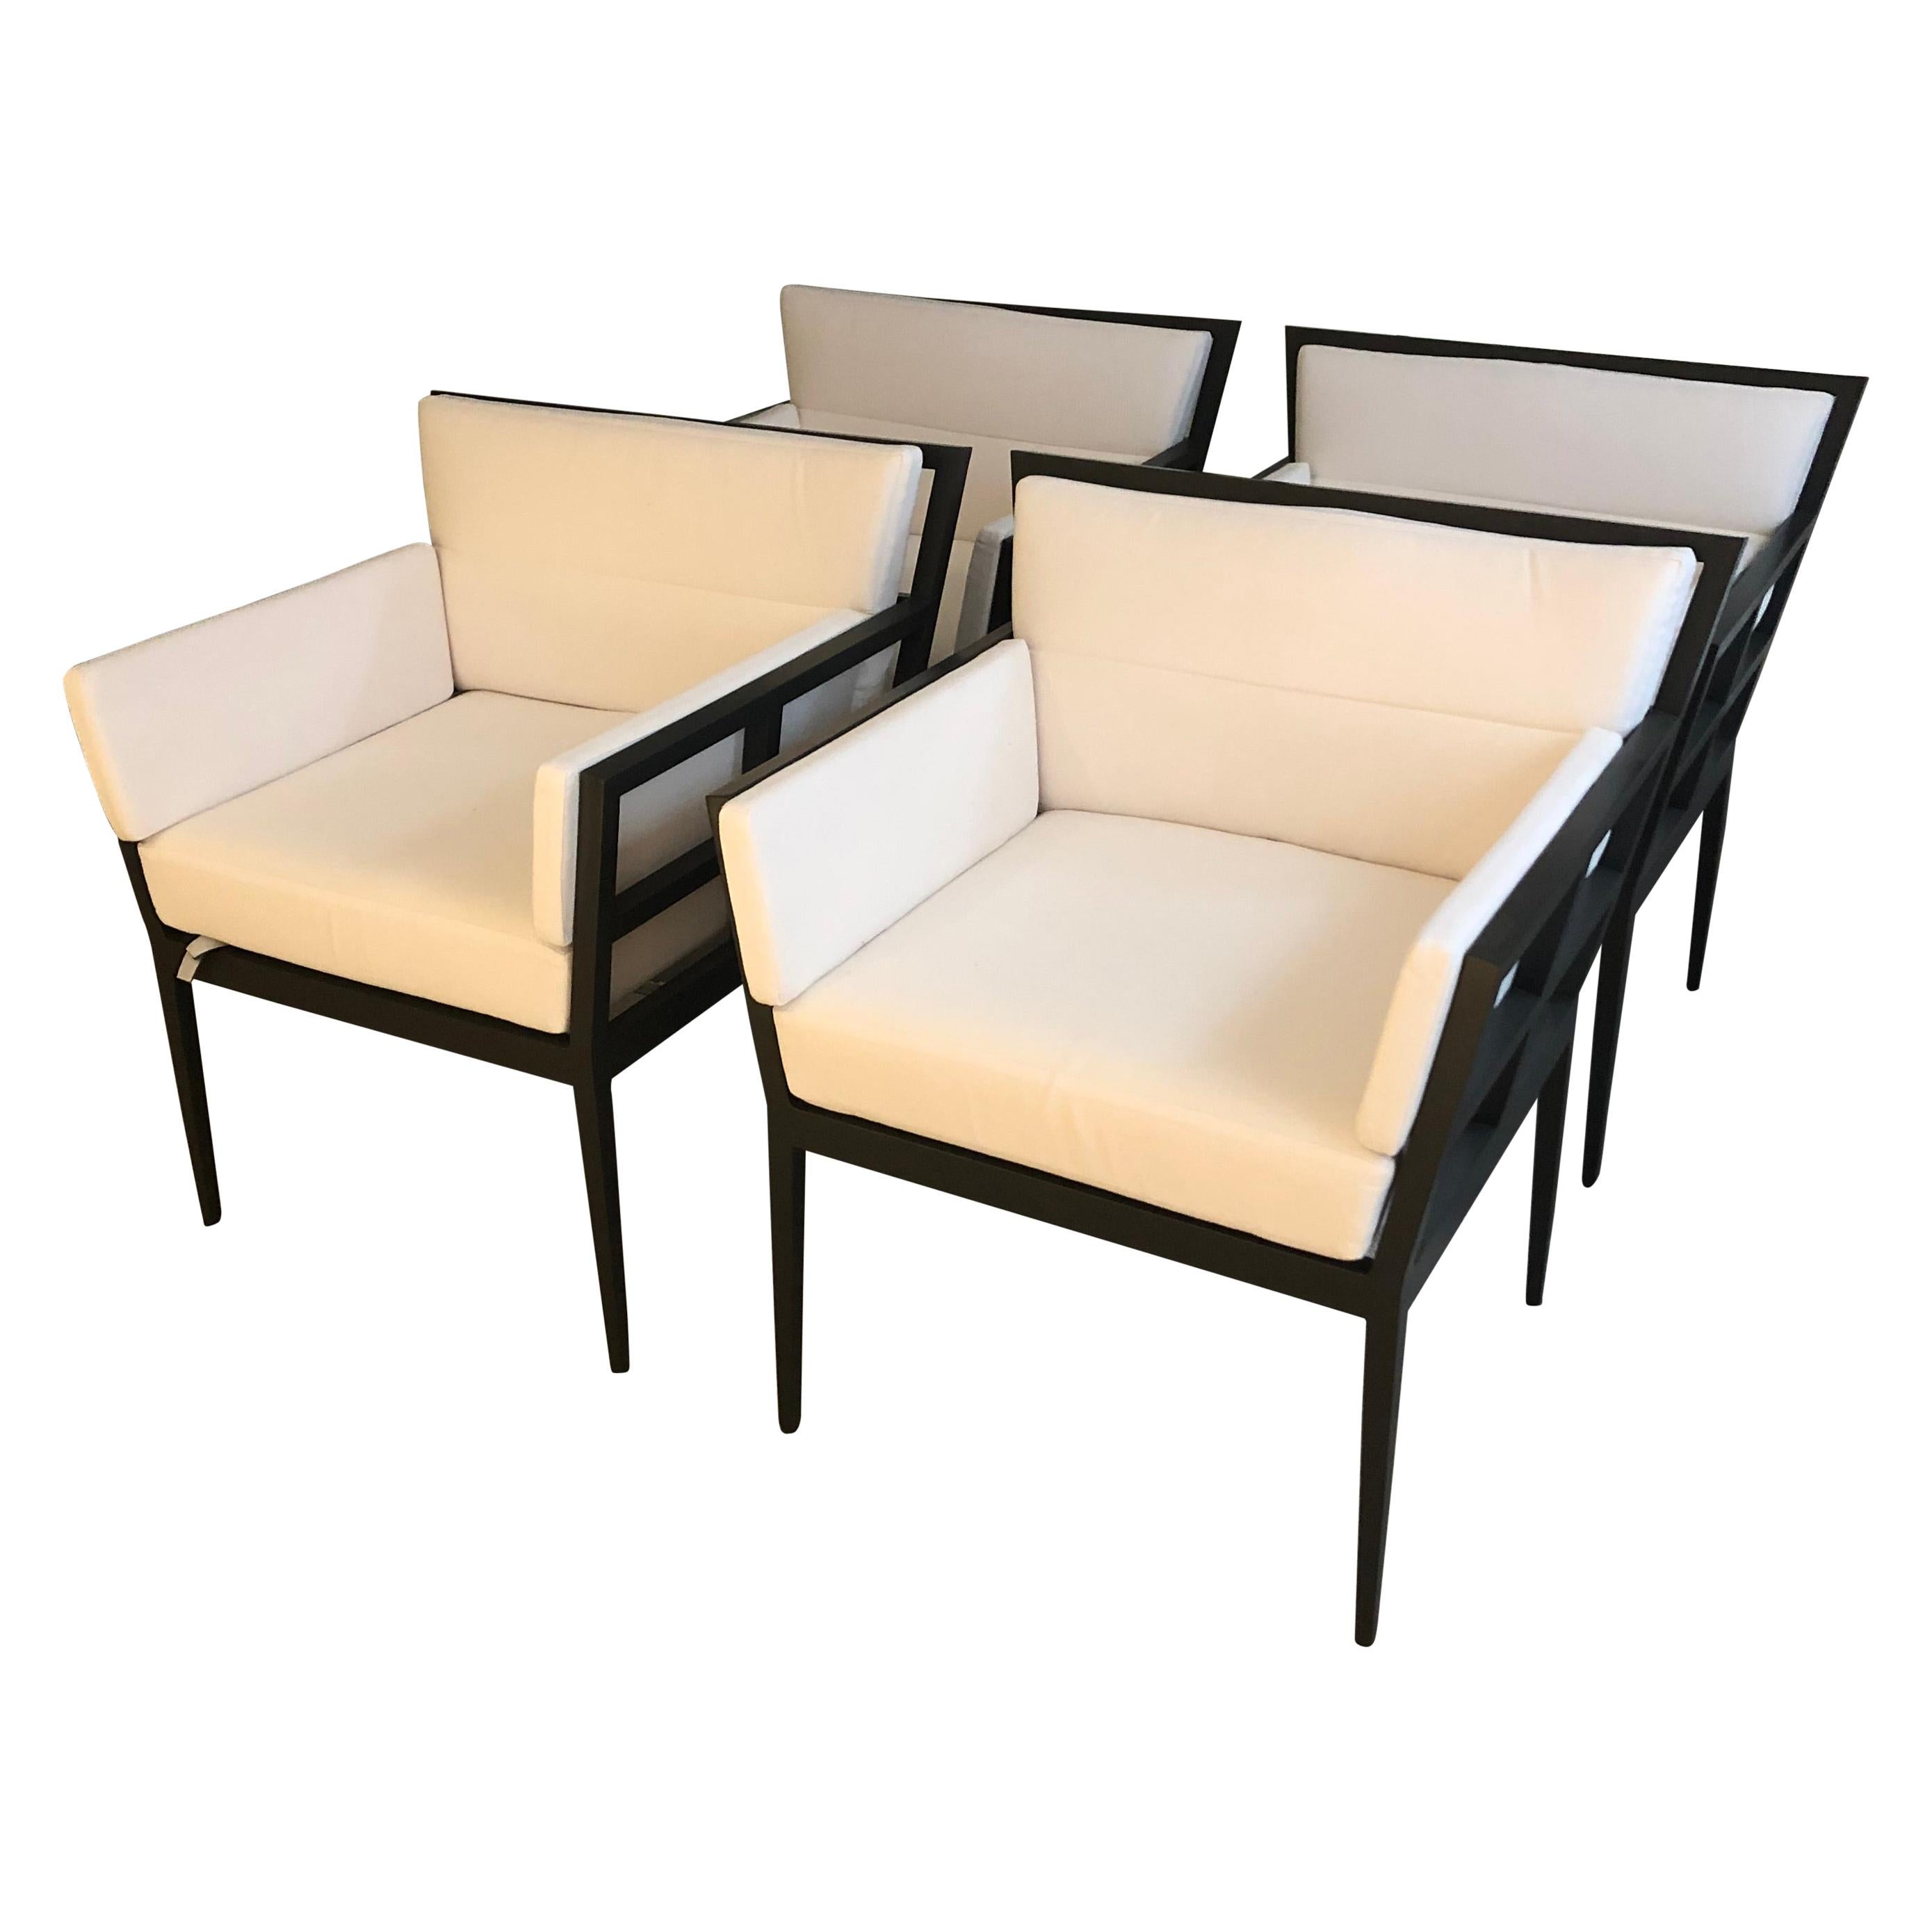 Set of 4 Janus Et Cie Stylish Aluminum & Upholstered Indoor Outdoor Club Chairs